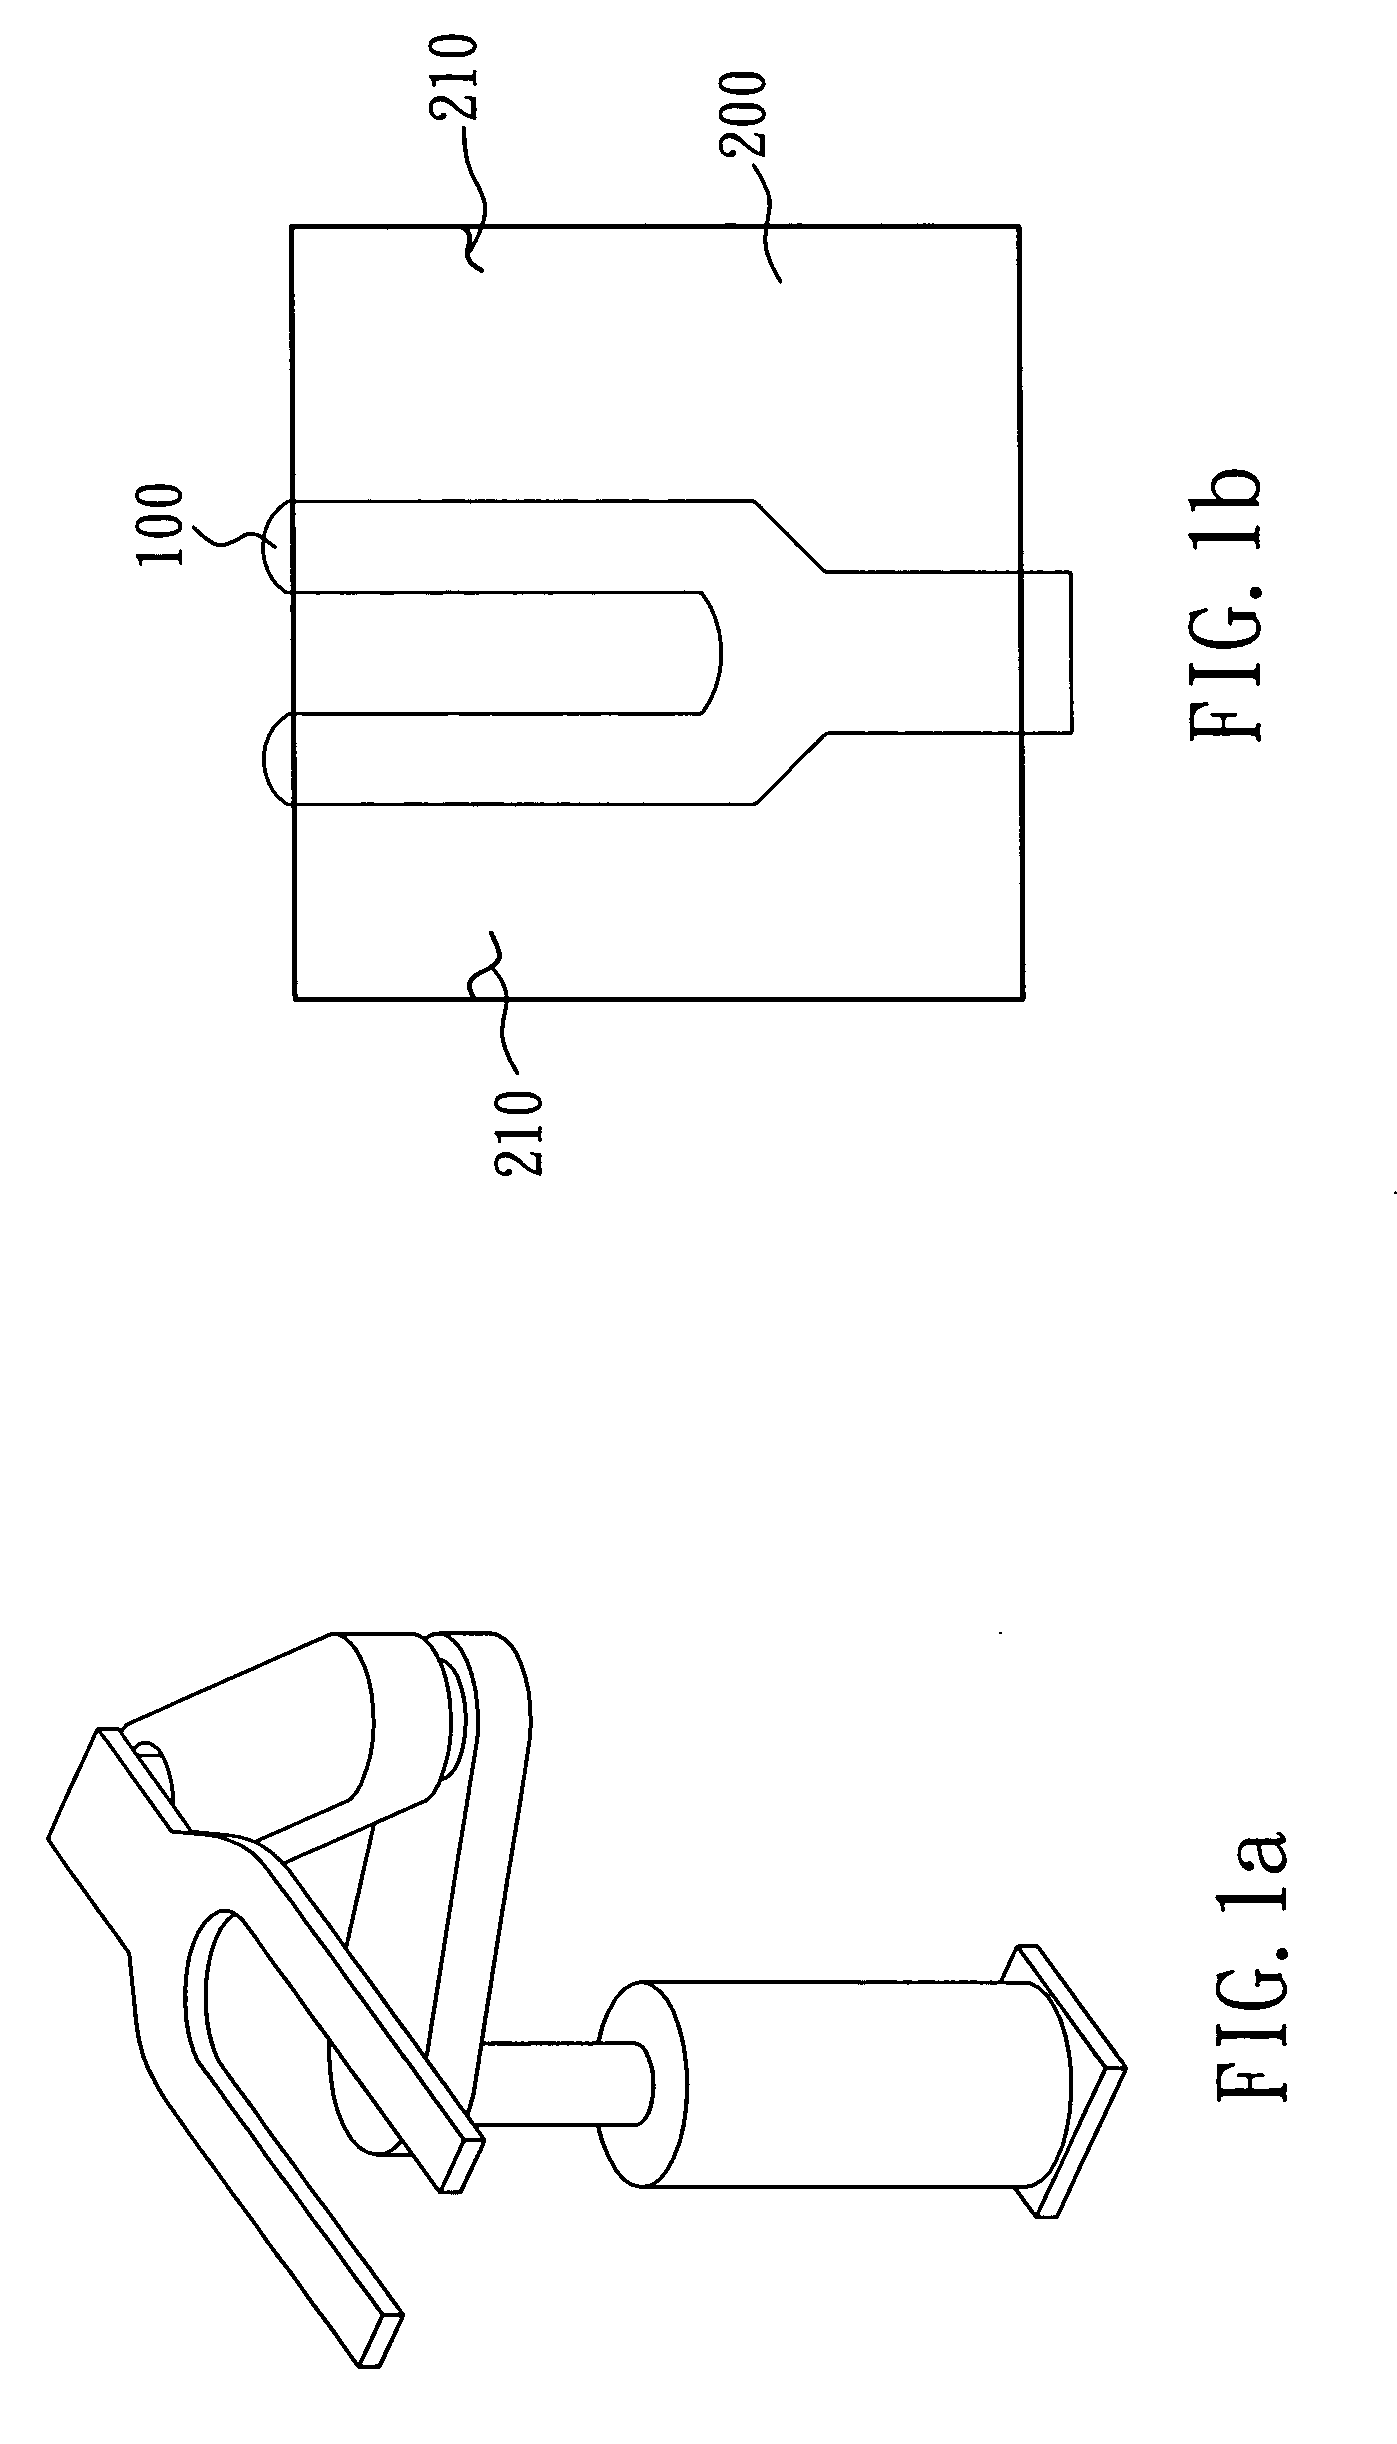 Substrate-transporting device